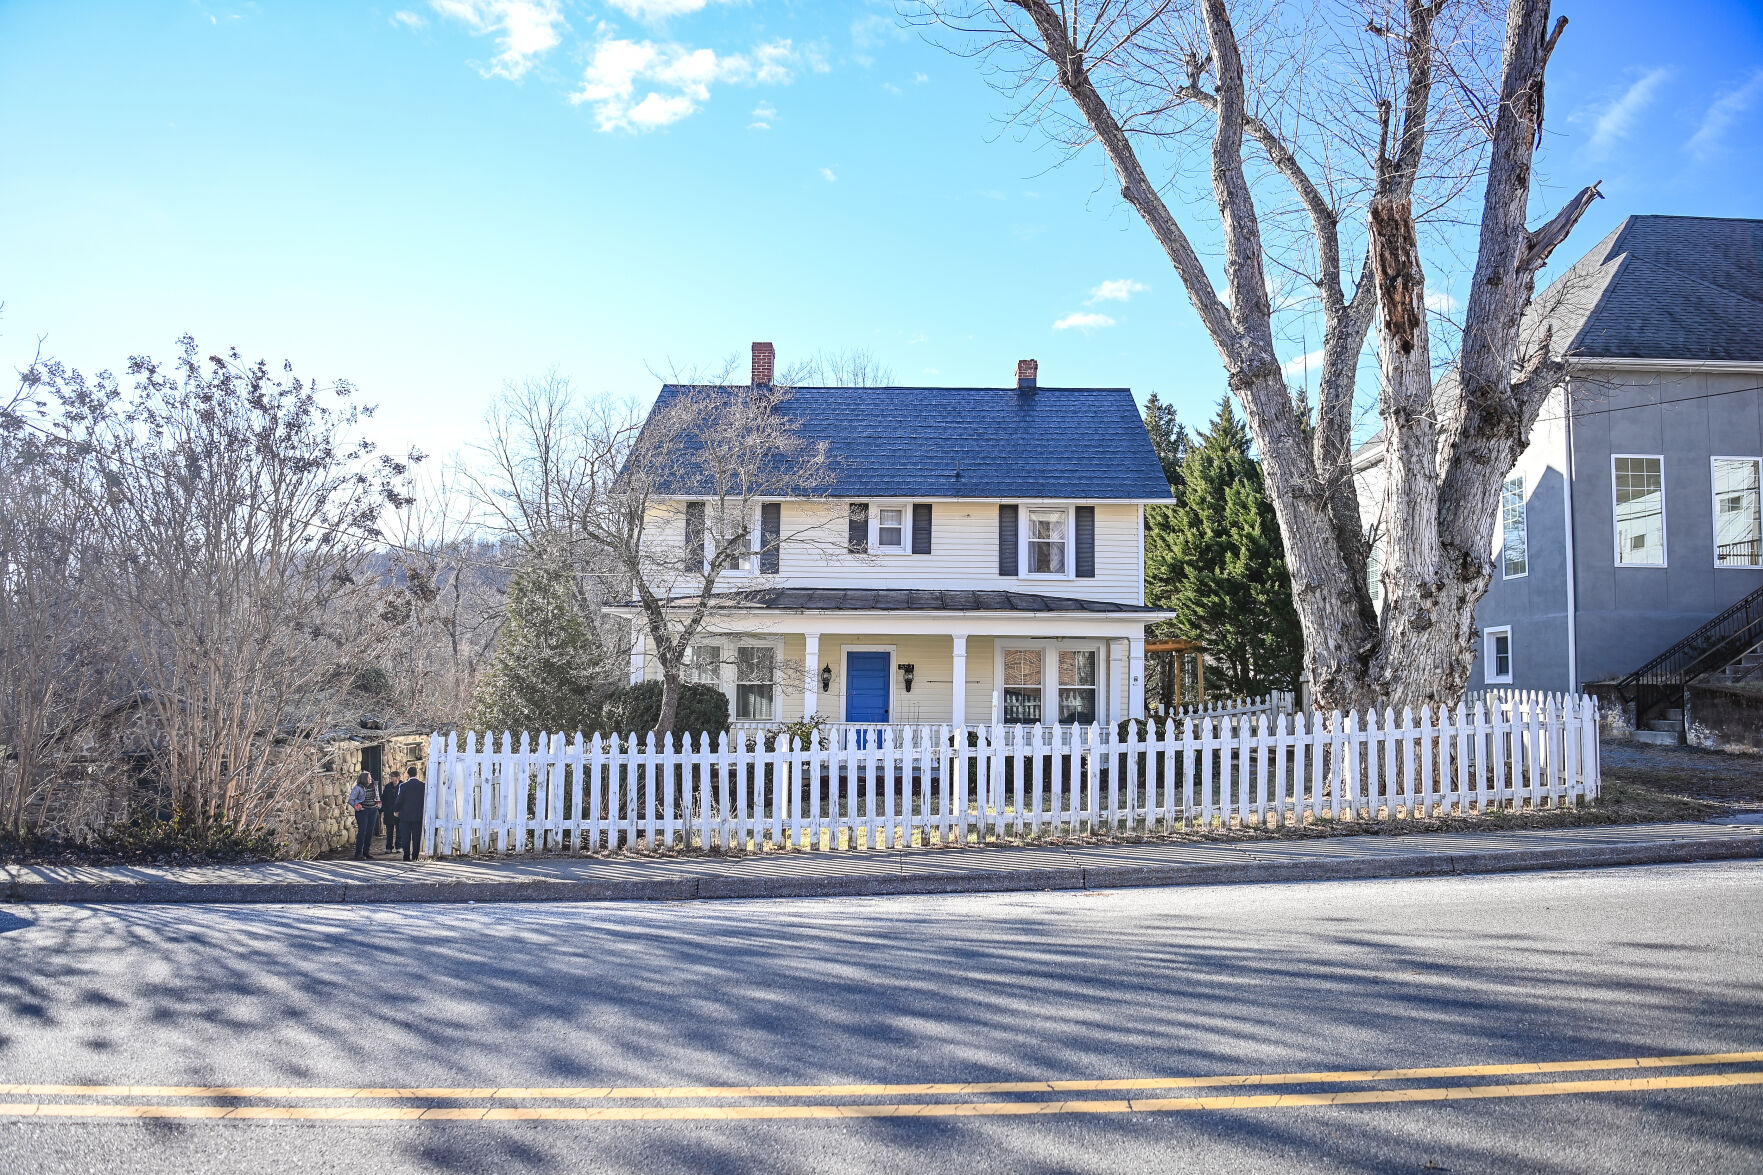 Colorful Lovingston home once housed a colorful family hq pic